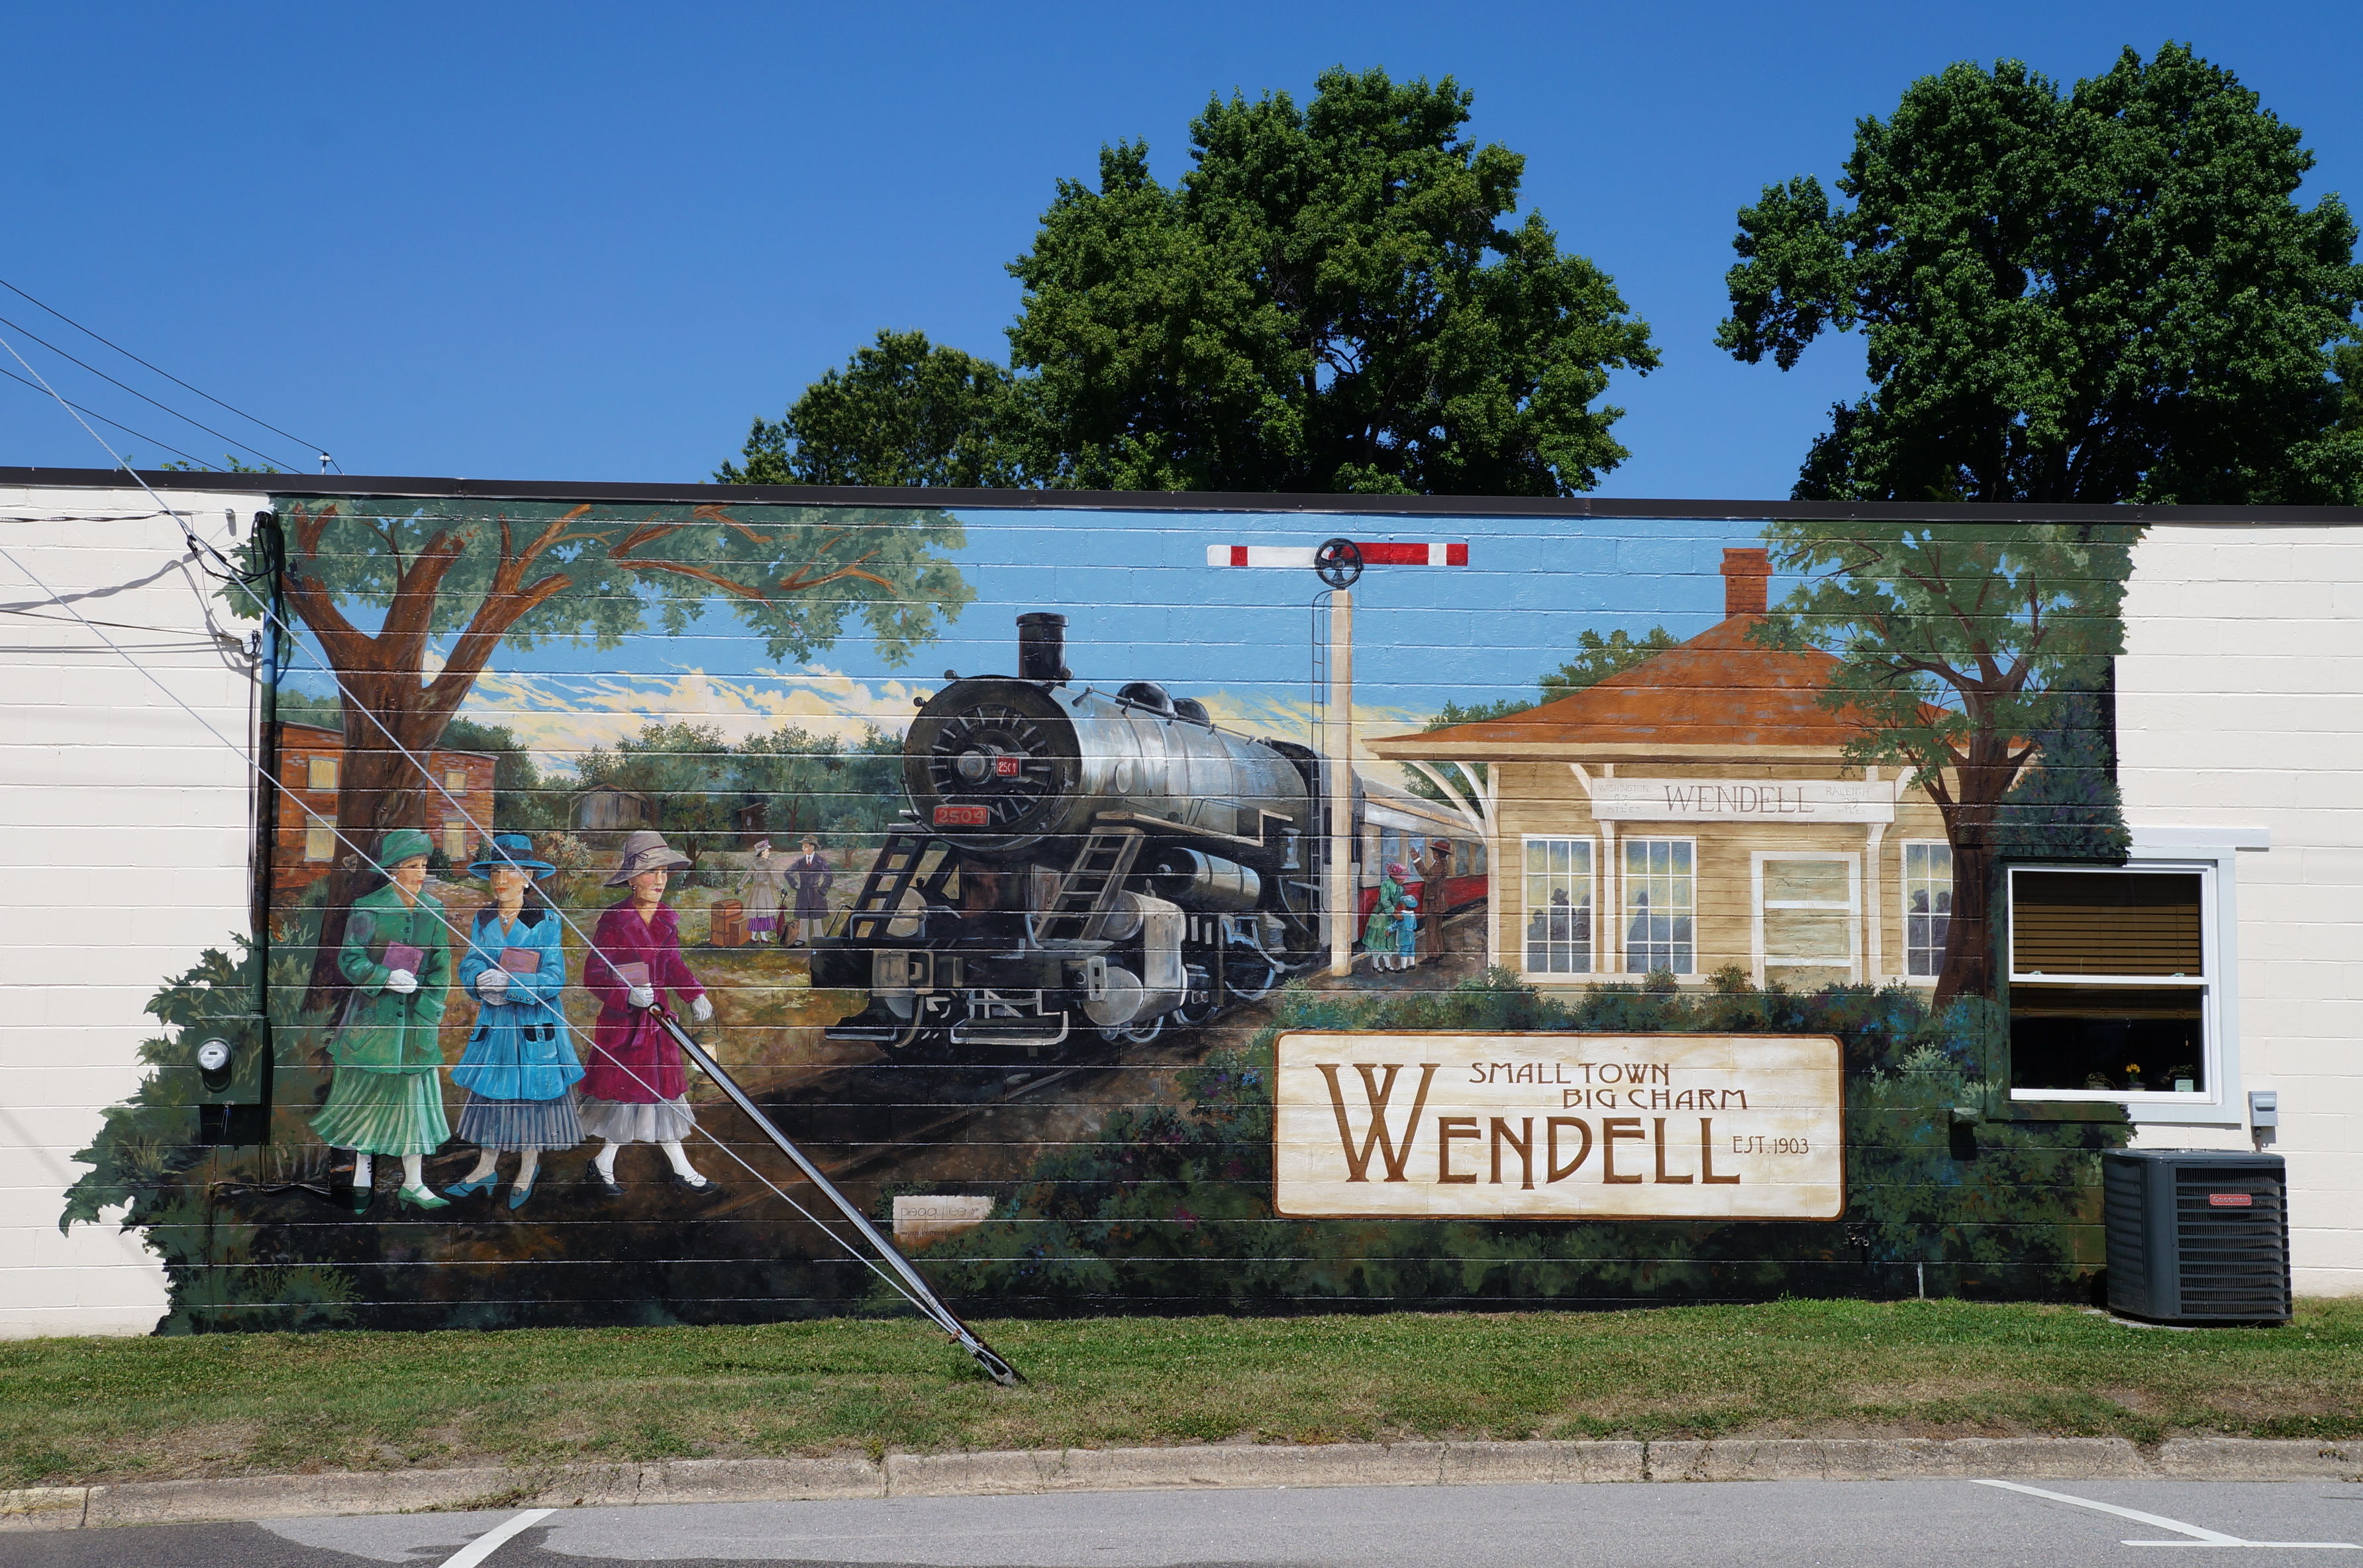 Train Mural, by Peggy Lee Laughery